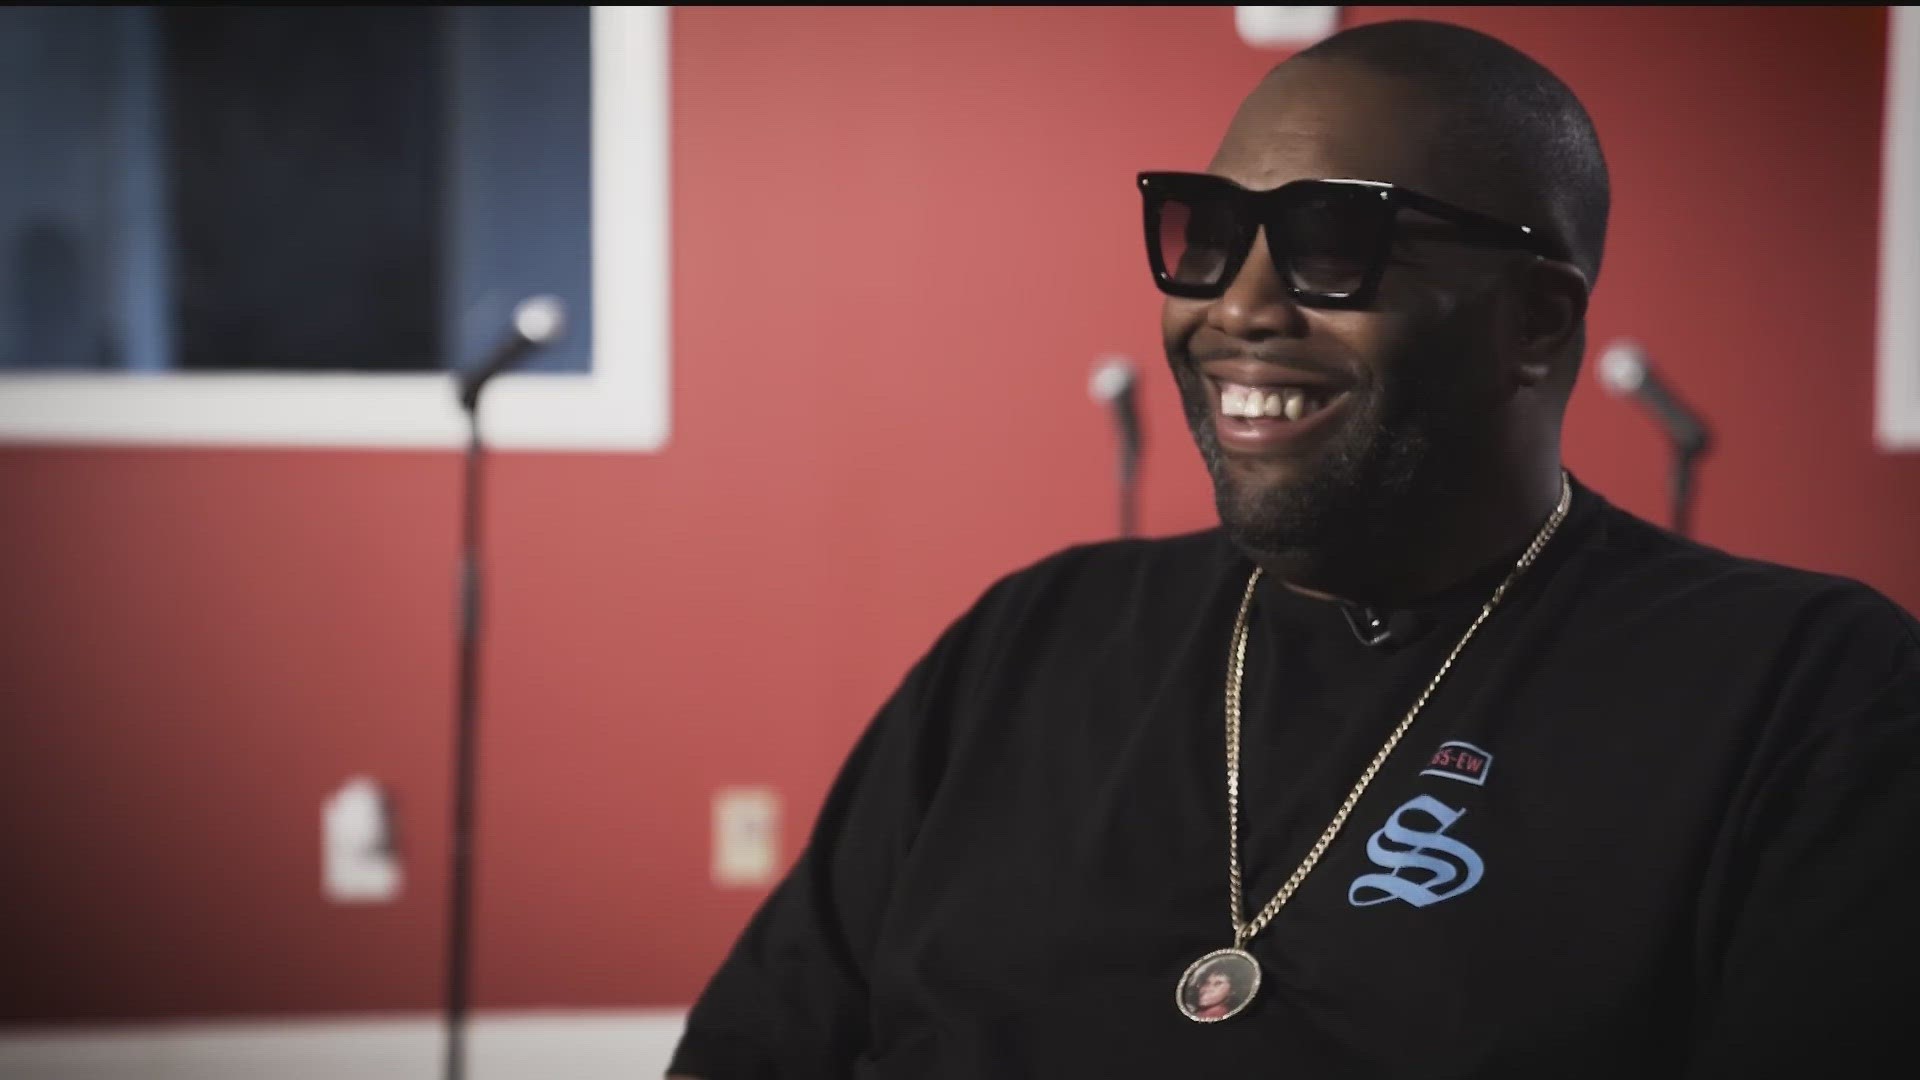 Atlanta native and Grammy-winning musician Michael Render, globally known as Killer Mike, has released his highly anticipated self-titled album “Michael” this summer